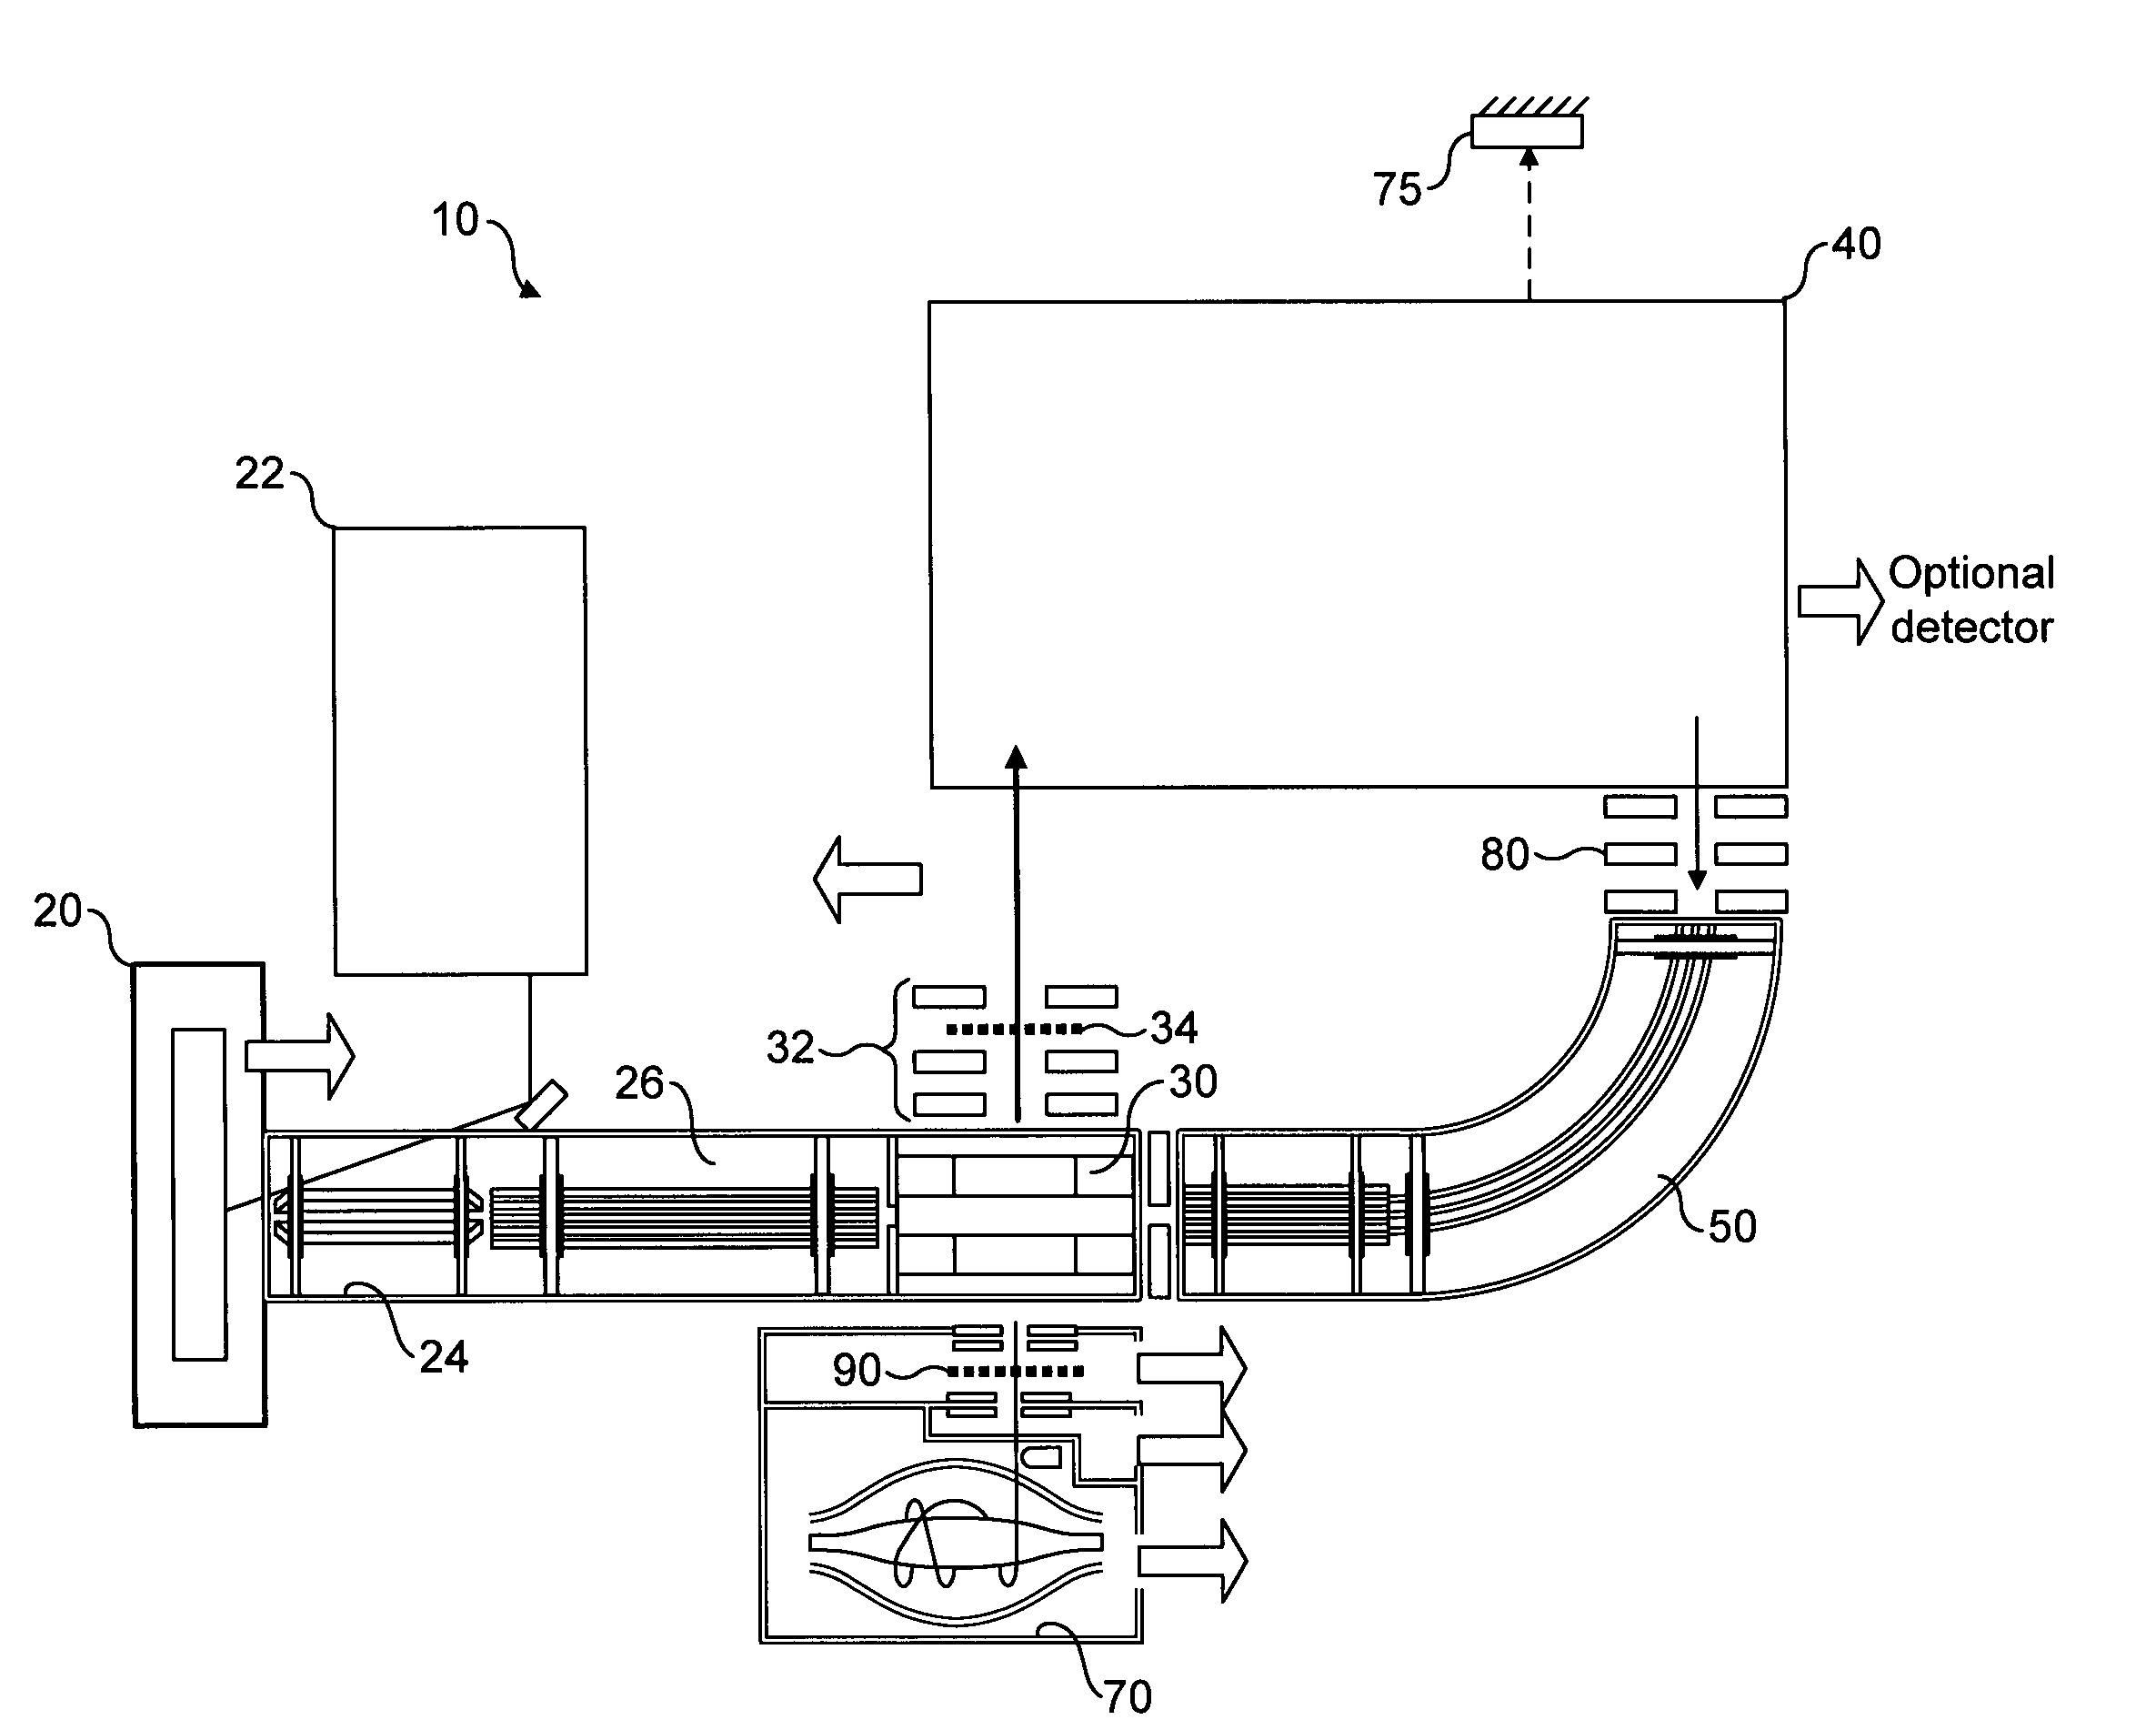 Mass spectrometer arrangement with fragmentation cell and ion selection device